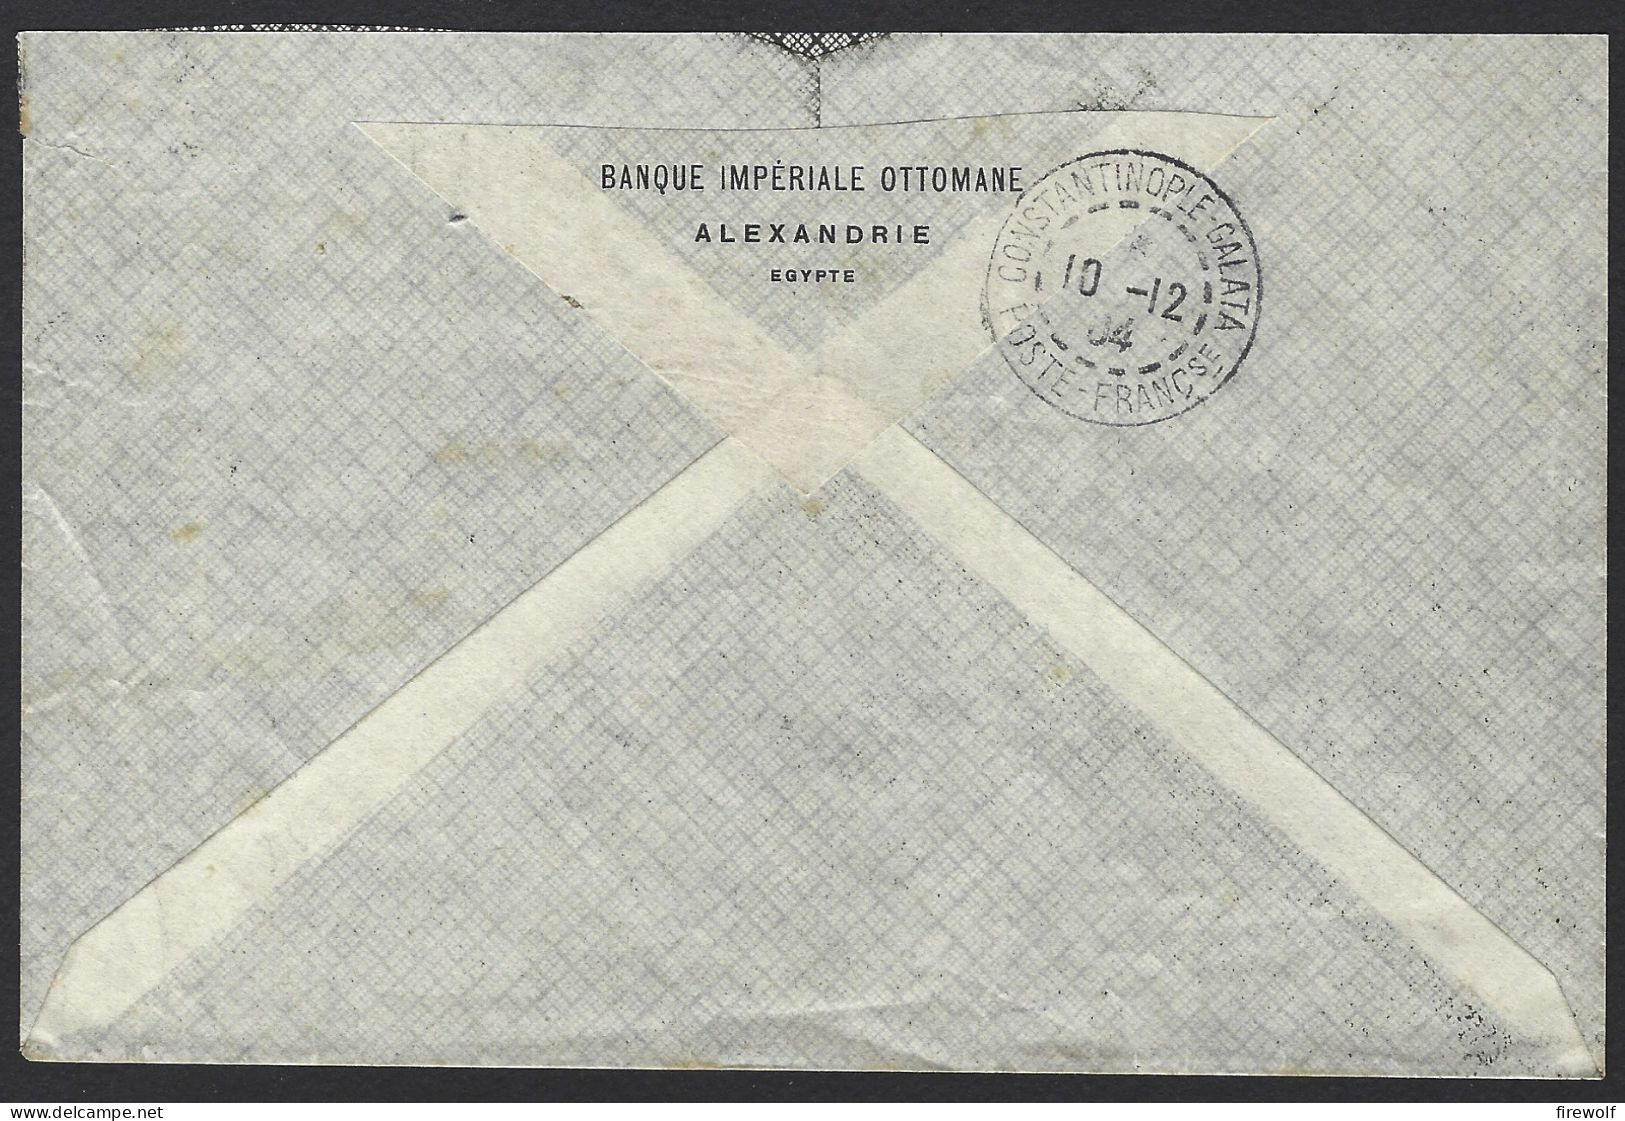 F05 - Egypt Alexandria - French Office - Registered Cover 1904 To Constantinopel - Banque Impériale Ottomane - Storia Postale